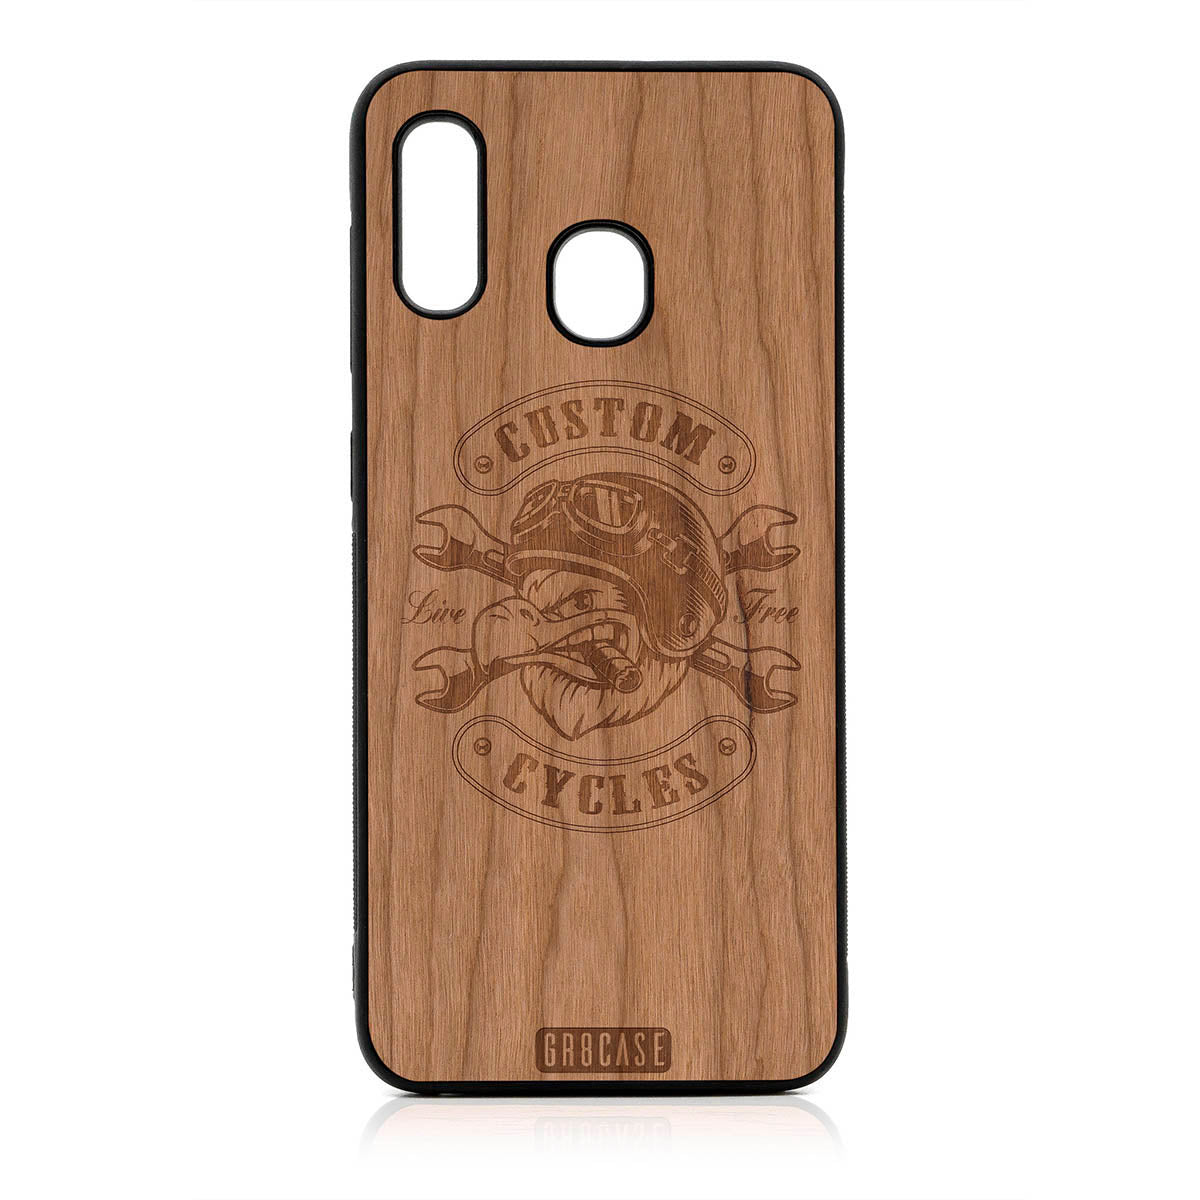 Custom Cycles Live Free (Biker Eagle) Design Wood Case For Samsung Galaxy A20 by GR8CASE